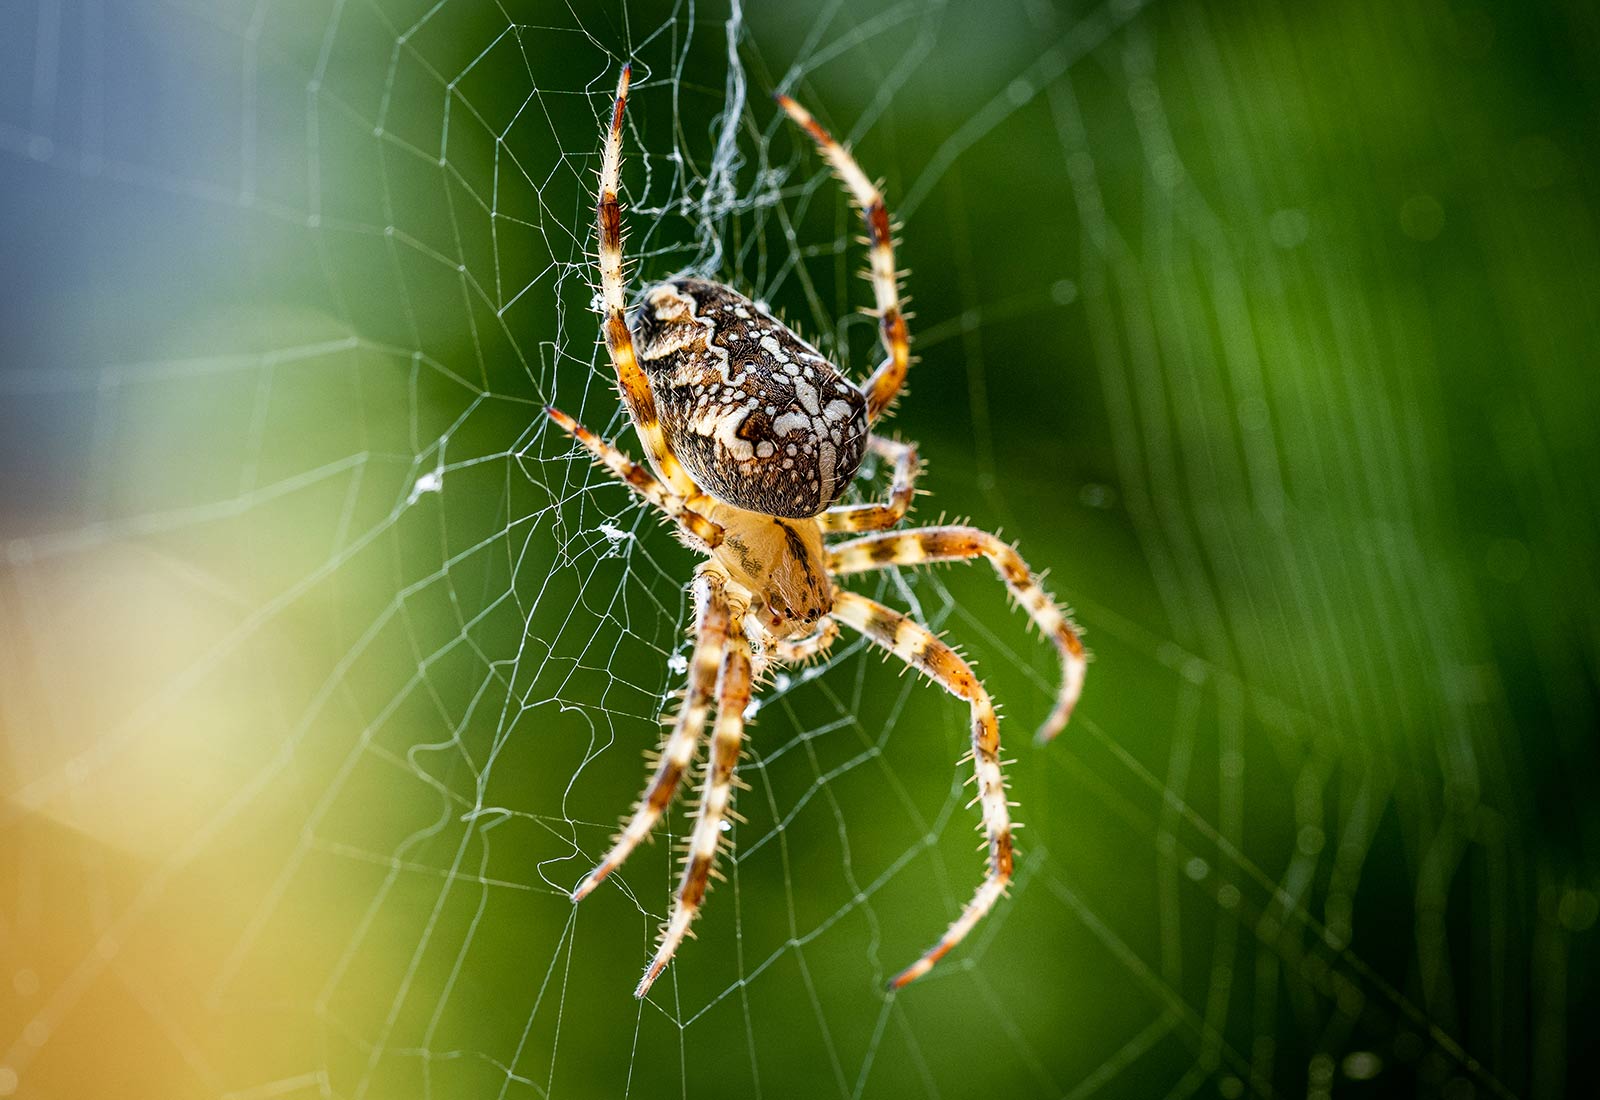 Orb-Weaver Spiders: Spooky Webs But Great For Pest Control